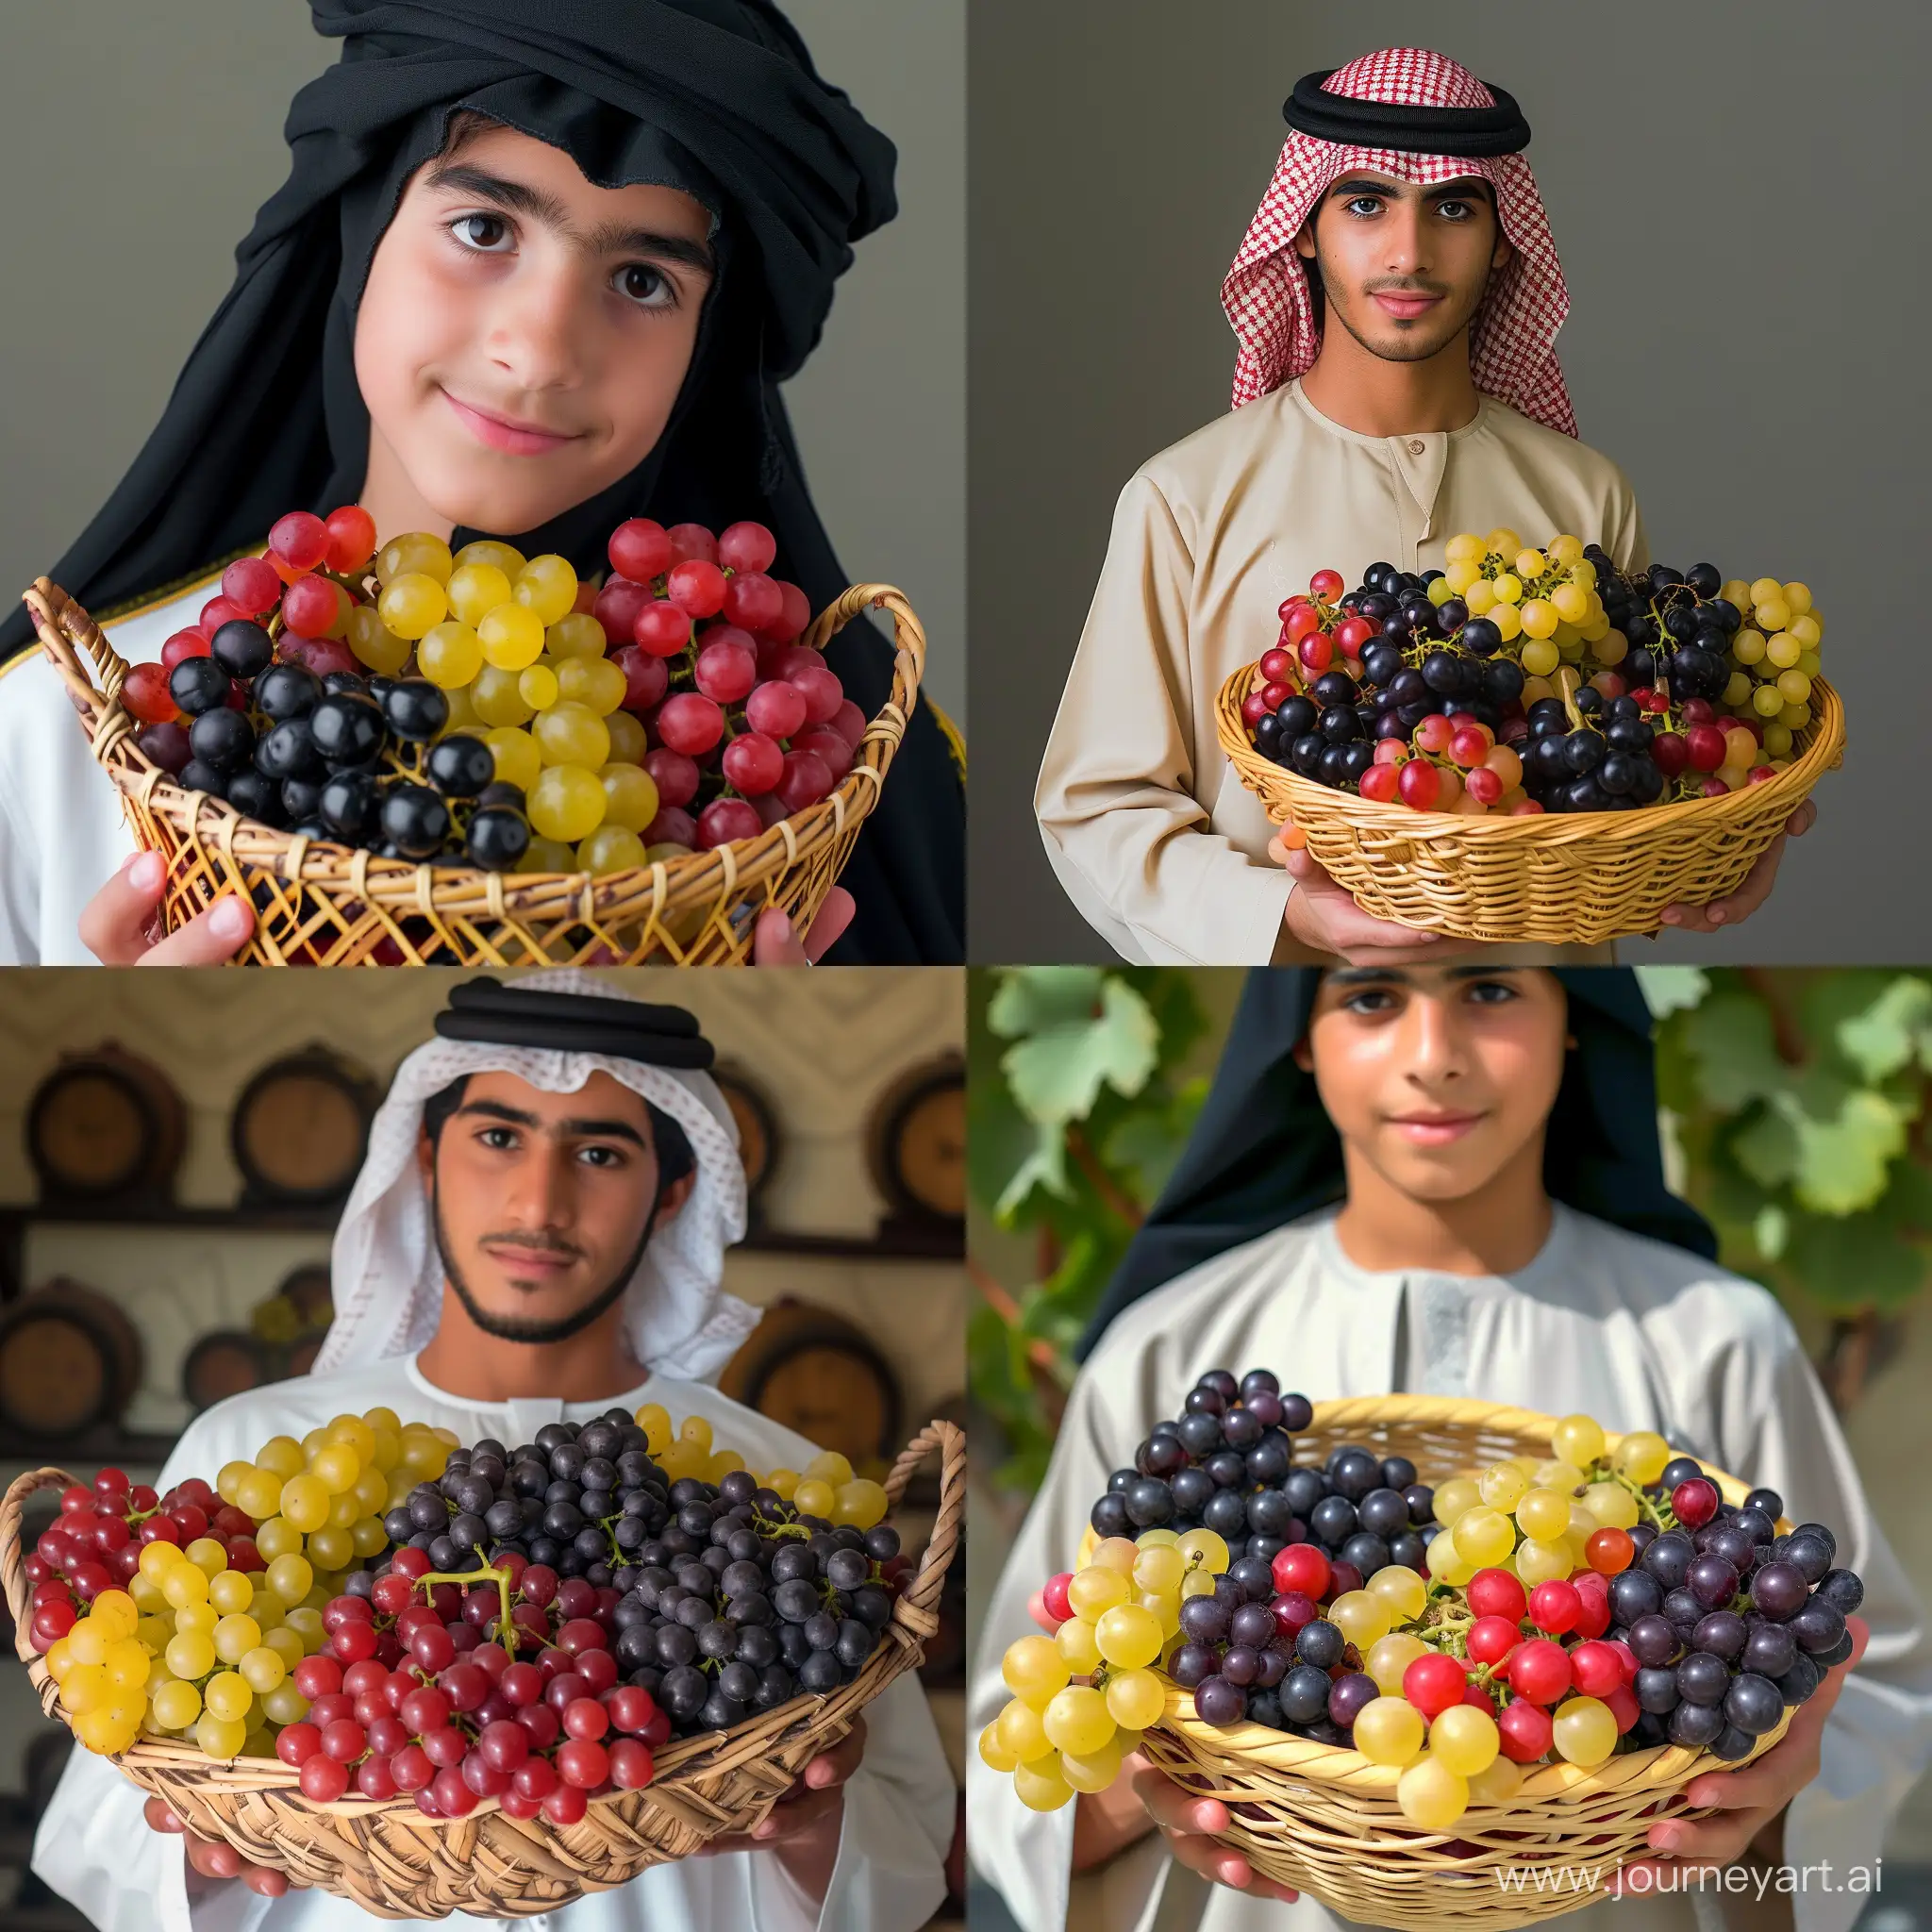 Real and natural photo of a man in Arabic dress holding a basket of grapes. Full details of the grape basket and the young man's face. The grape basket is in the middle of the picture. Red, yellow, black and green grapes.